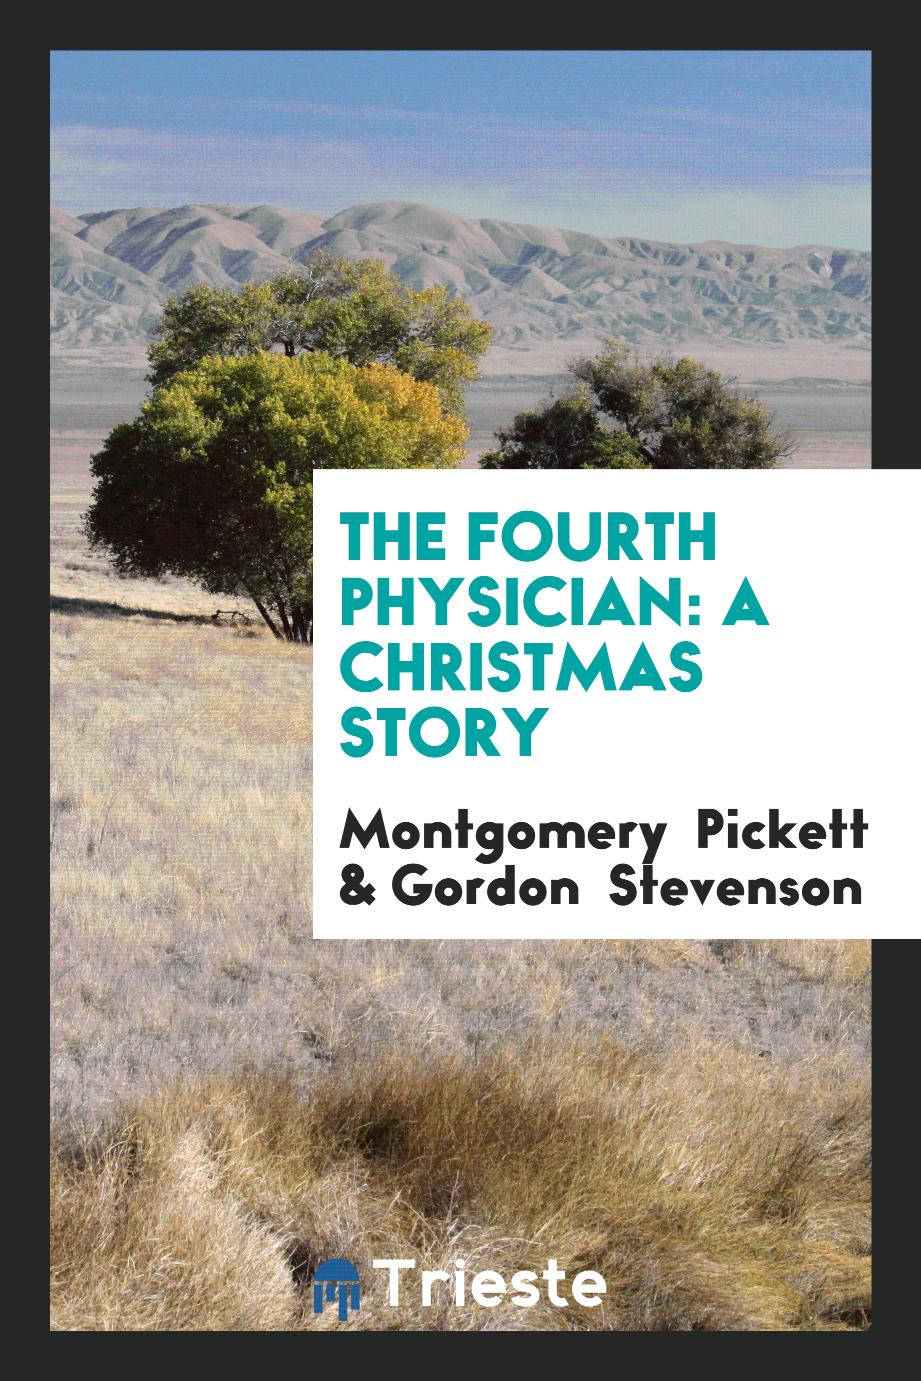 The Fourth Physician: A Christmas Story